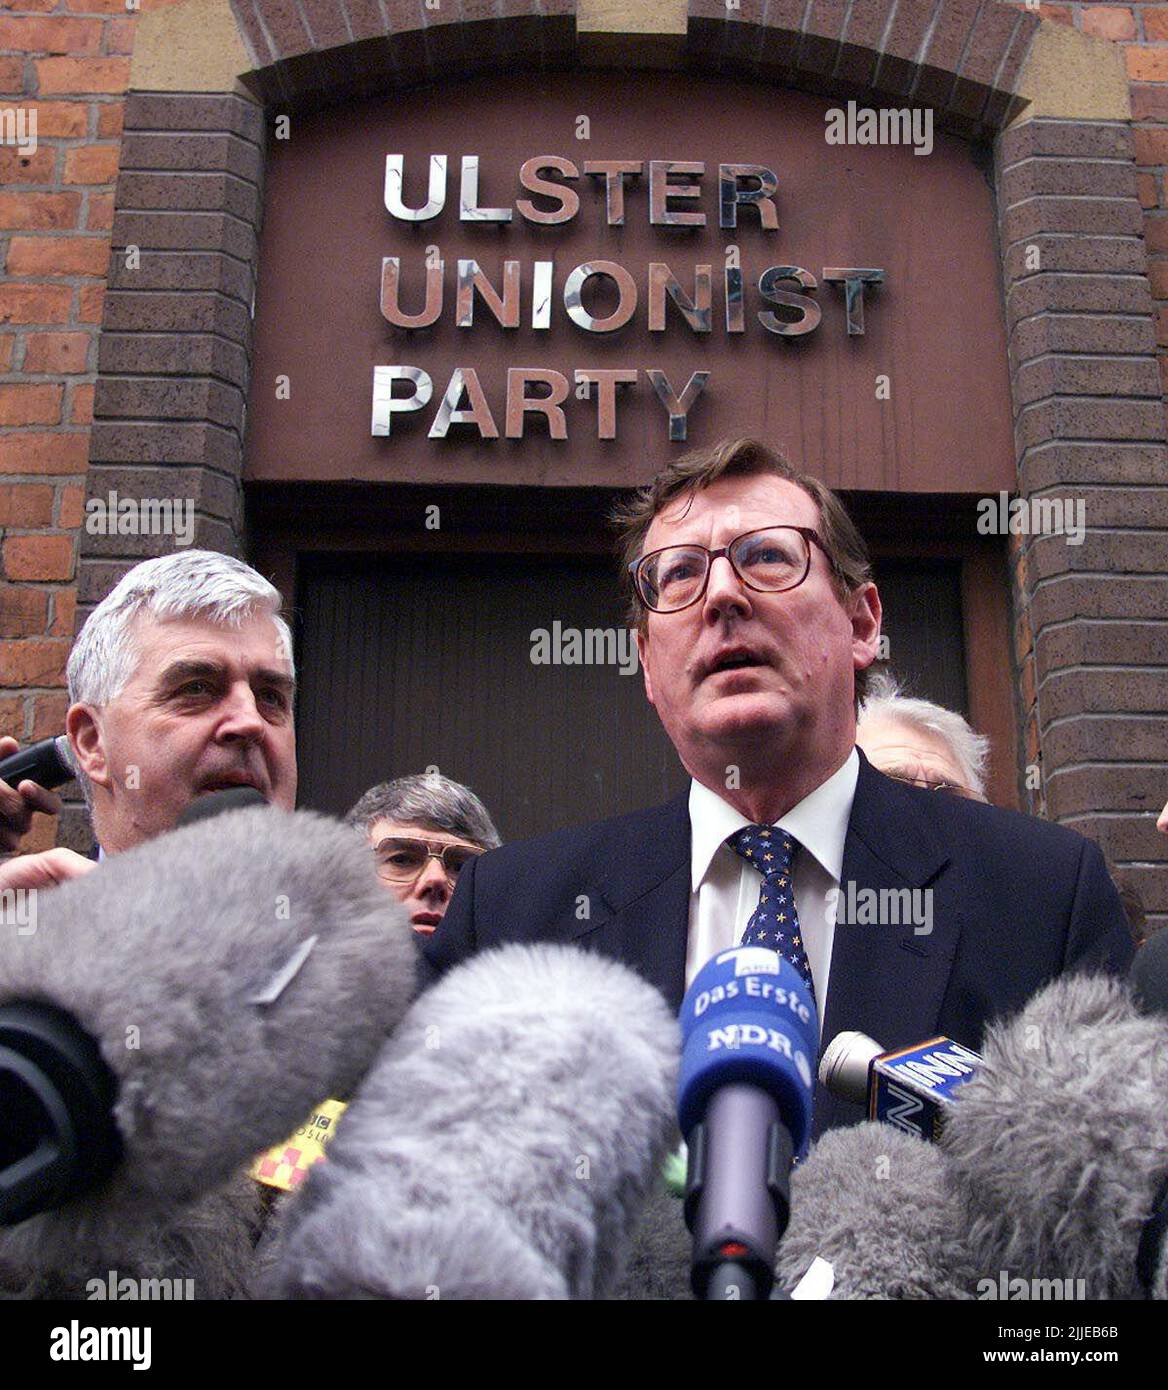 File photo dated 14/7/1999 of Ulster Unionist leader David Trimble with colleagues speak to the media, after the meeting of the Ulster unionist executive meeting broke up. The former Northern Ireland first minister has died, the Ulster Unionist Party has announced. Issue date: Monday July 25, 2022. Stock Photo